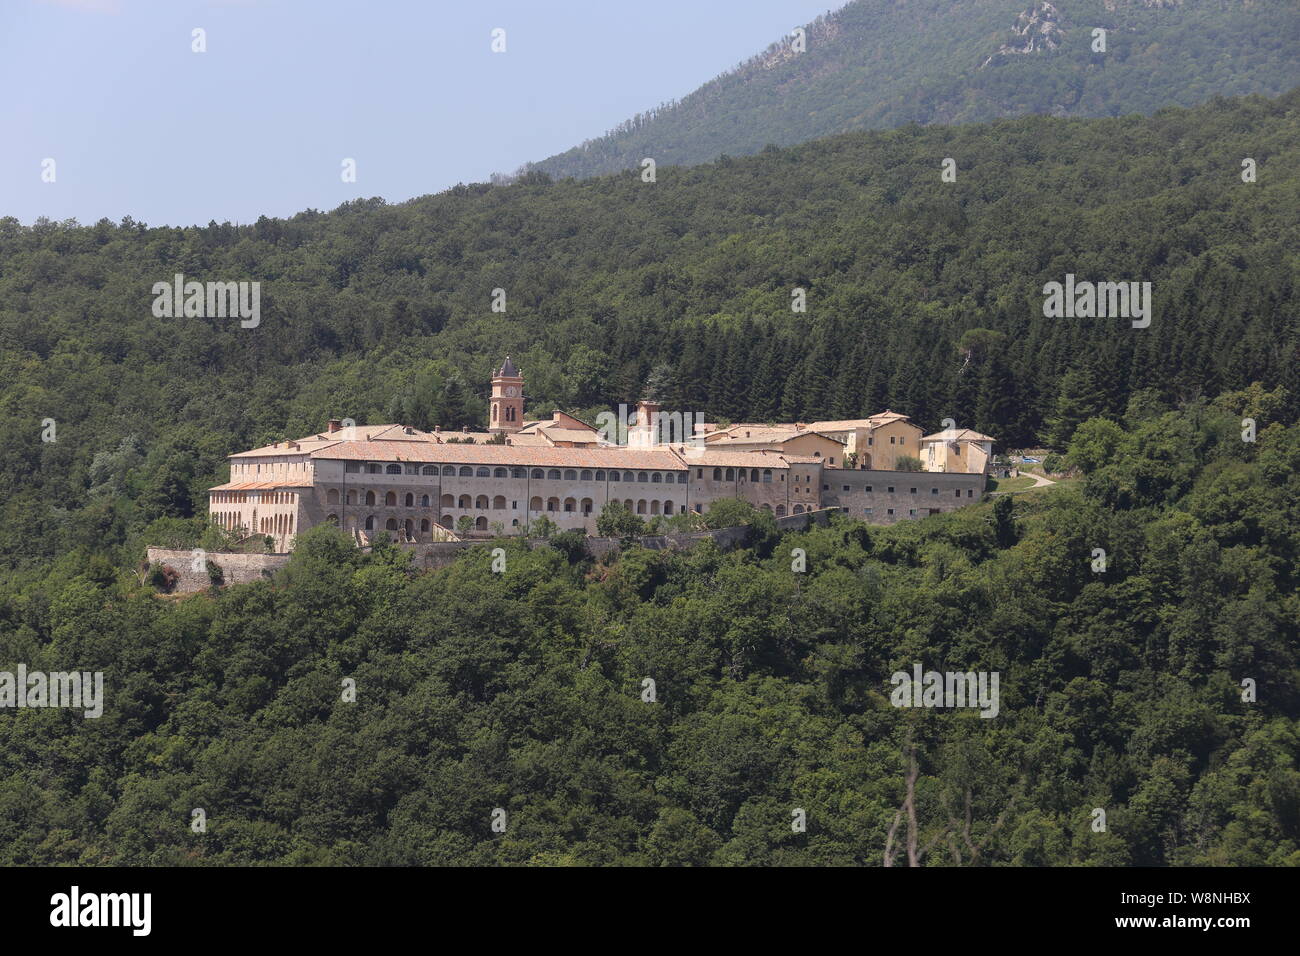 Collepardo, Italy - August 9, 2019: The Charterhouse of Trisulti Stock Photo